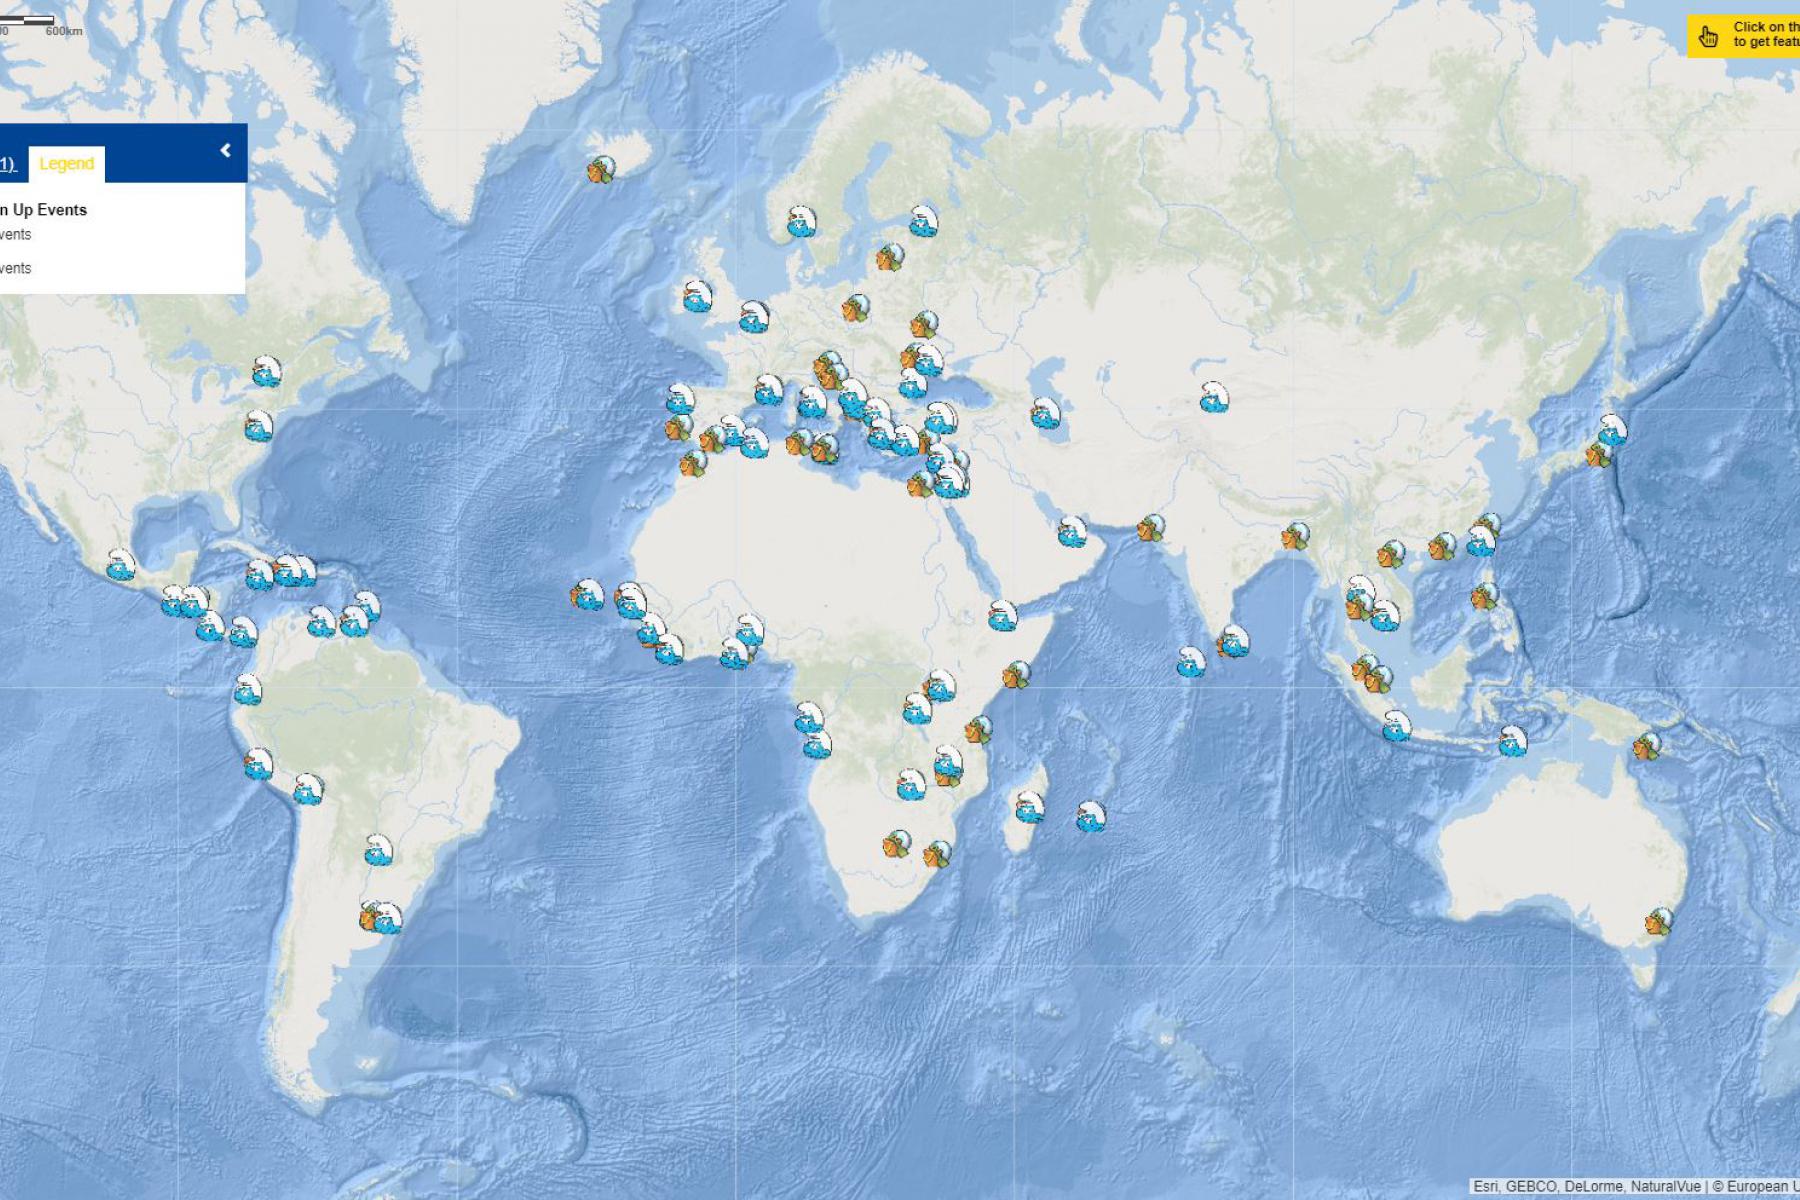 Map of the Week – #EUBeachCleanUp